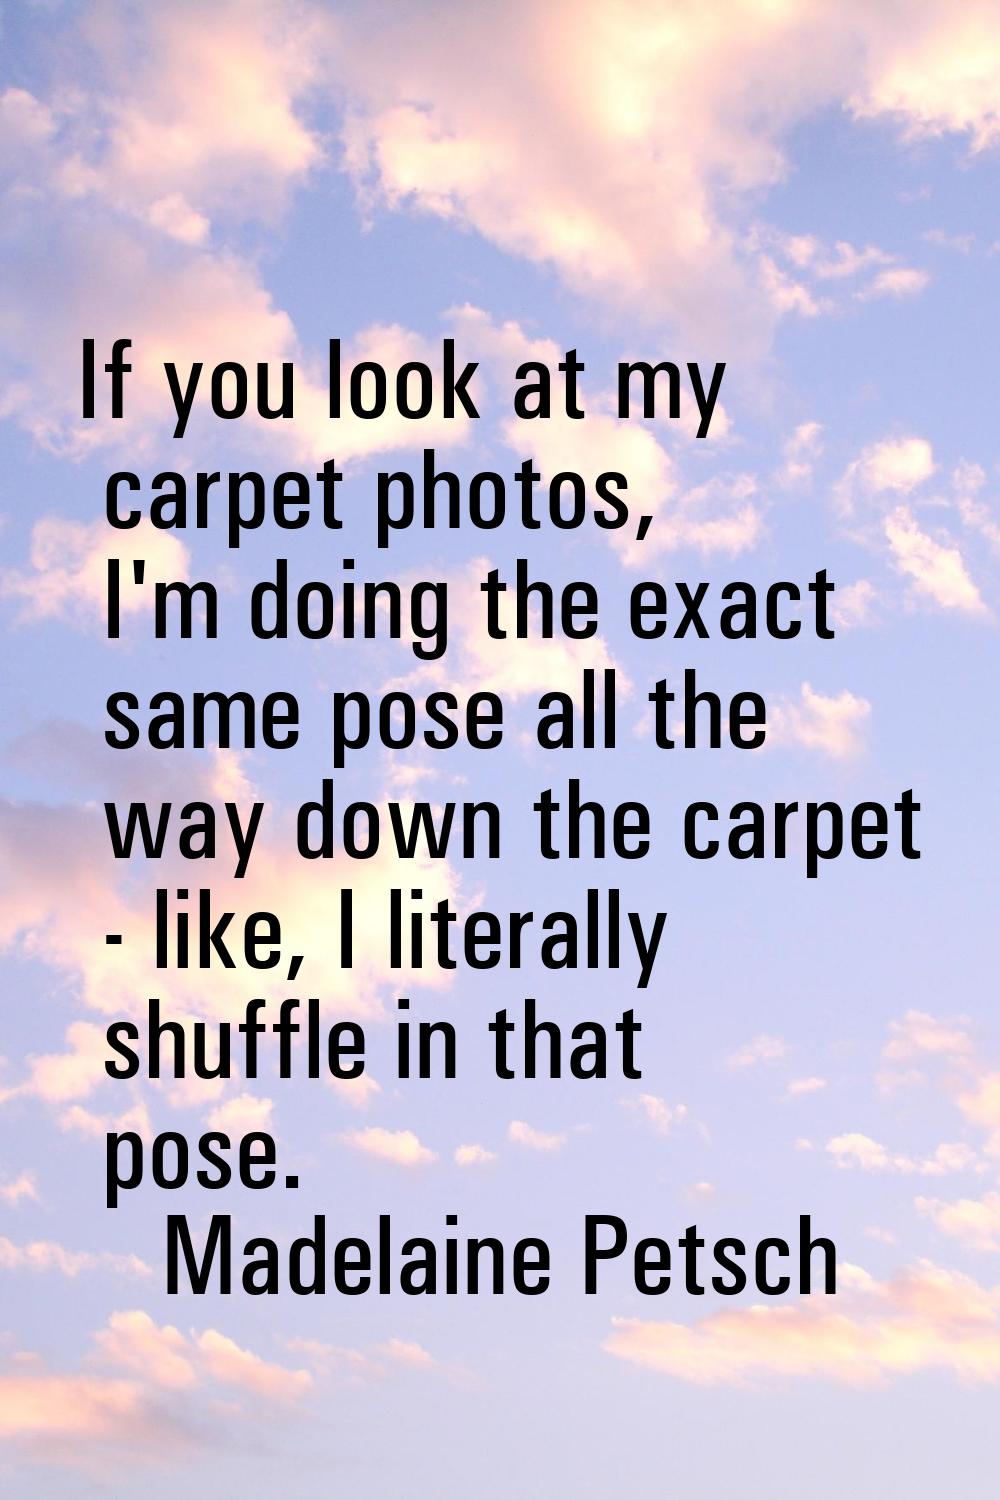 If you look at my carpet photos, I'm doing the exact same pose all the way down the carpet - like, 